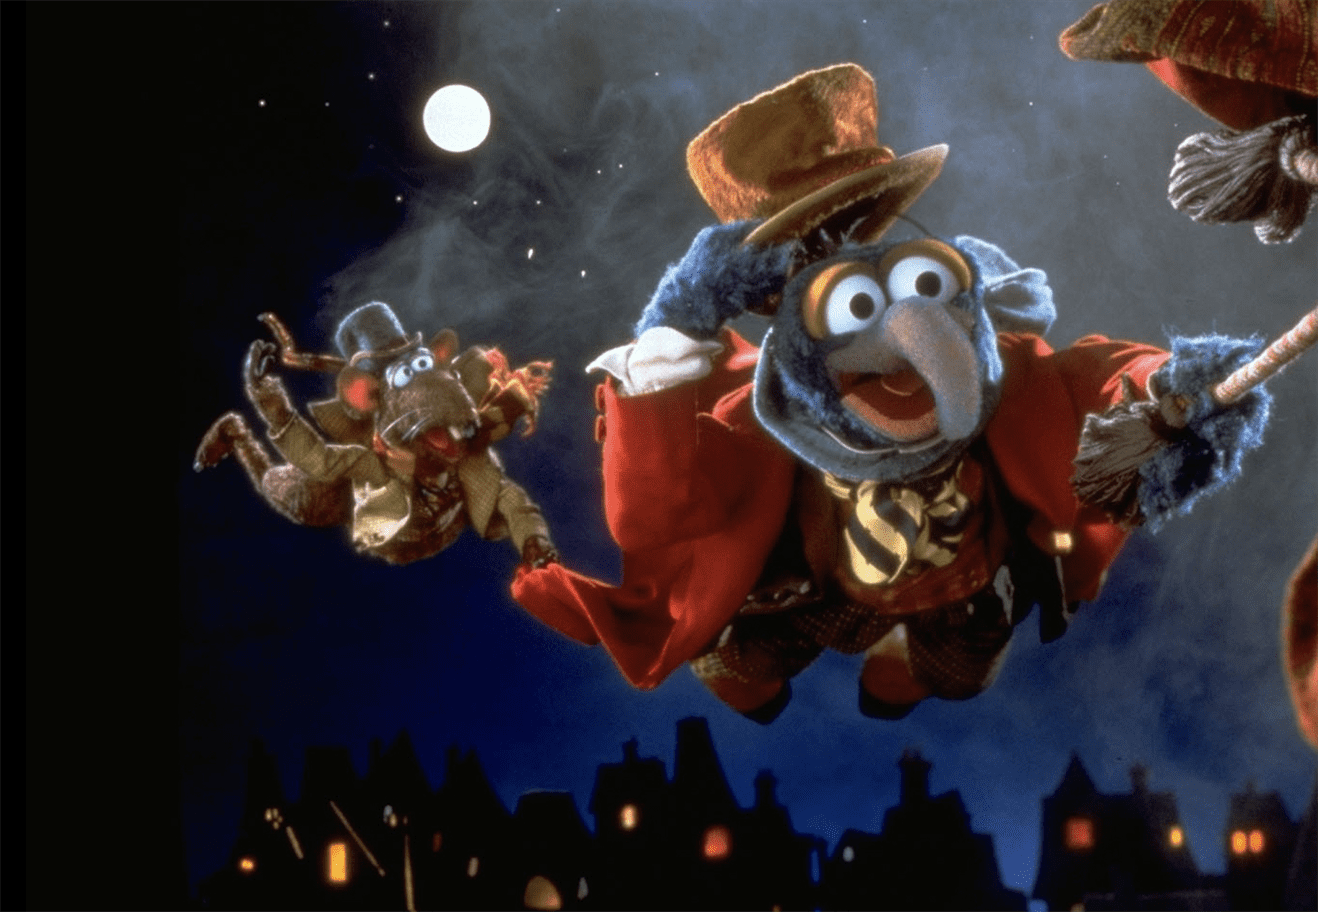 The Muppets put their own unique spin on "The Muppet Christmas Carol." Photo courtesy of Walt Disney Pictures